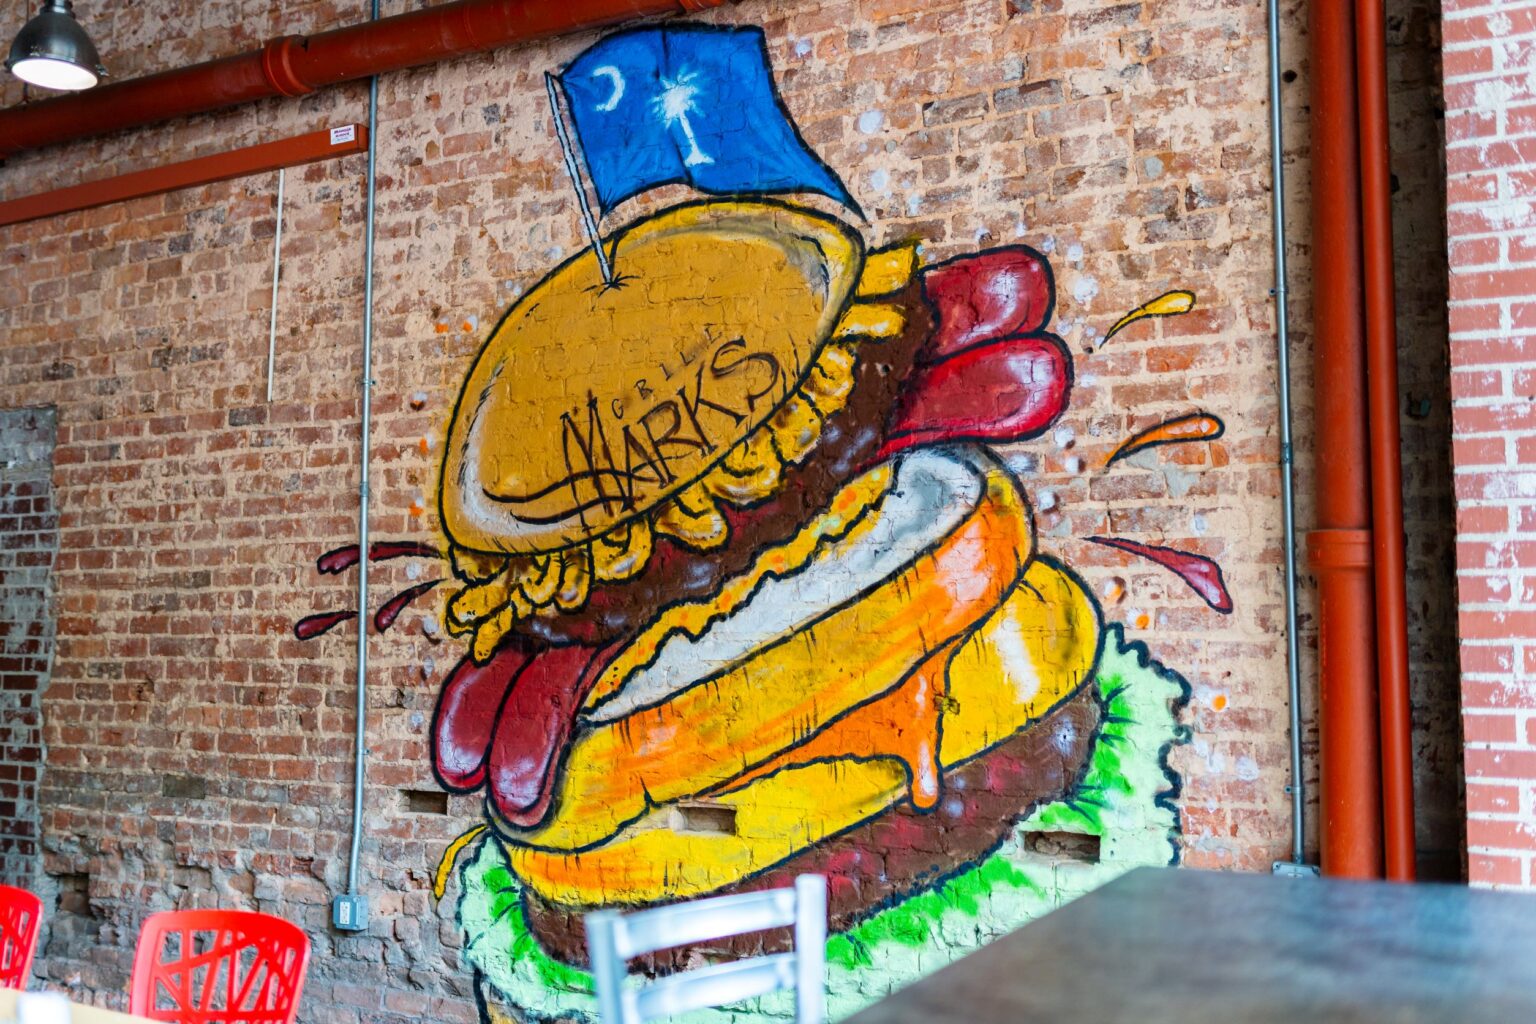 Home | Grill Marks - Burgers, Shakes, Bar in Greenville South Carolina